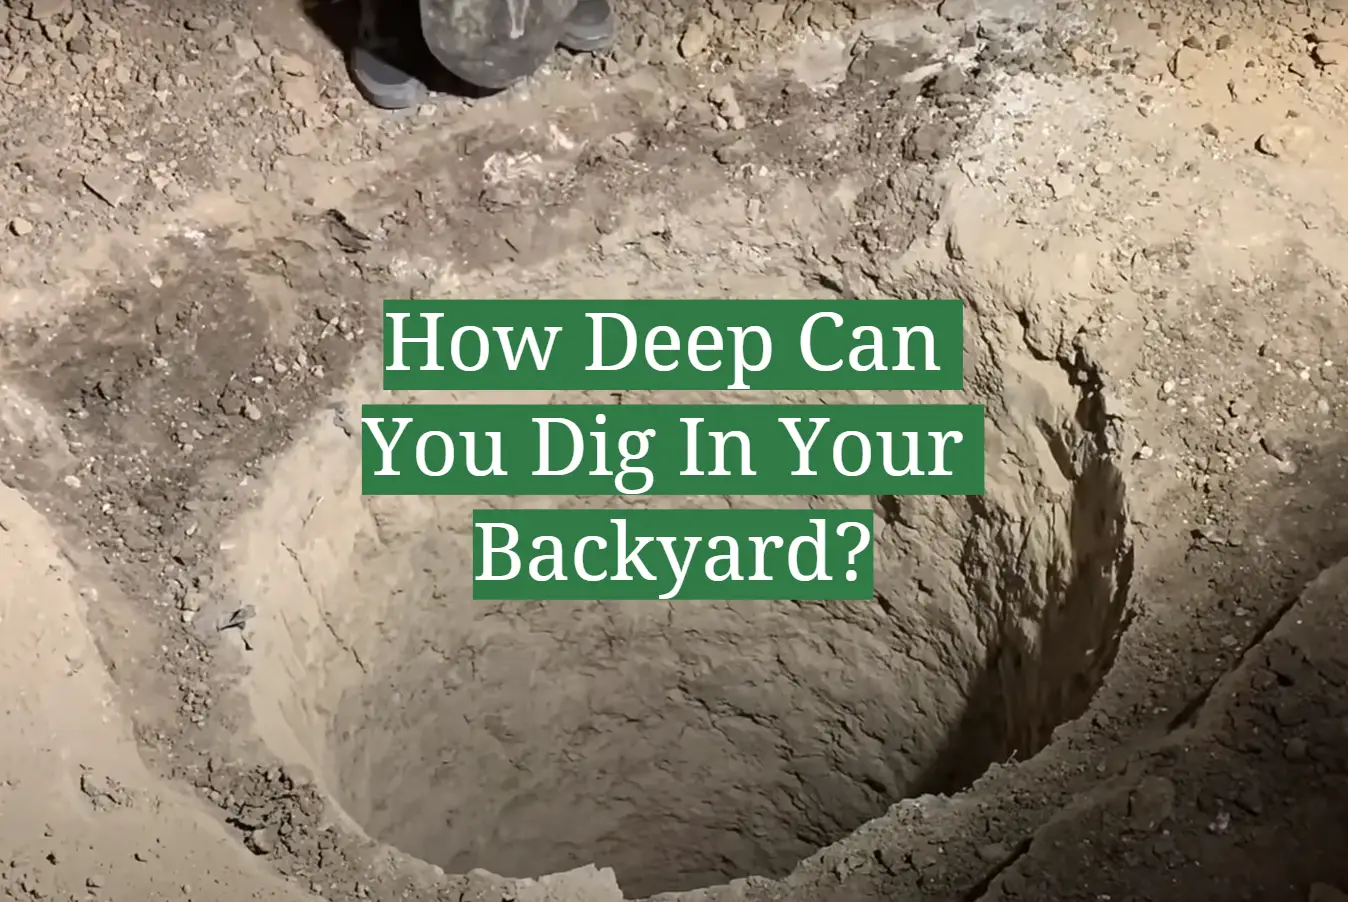 How Deep Can You Dig In Your Backyard?